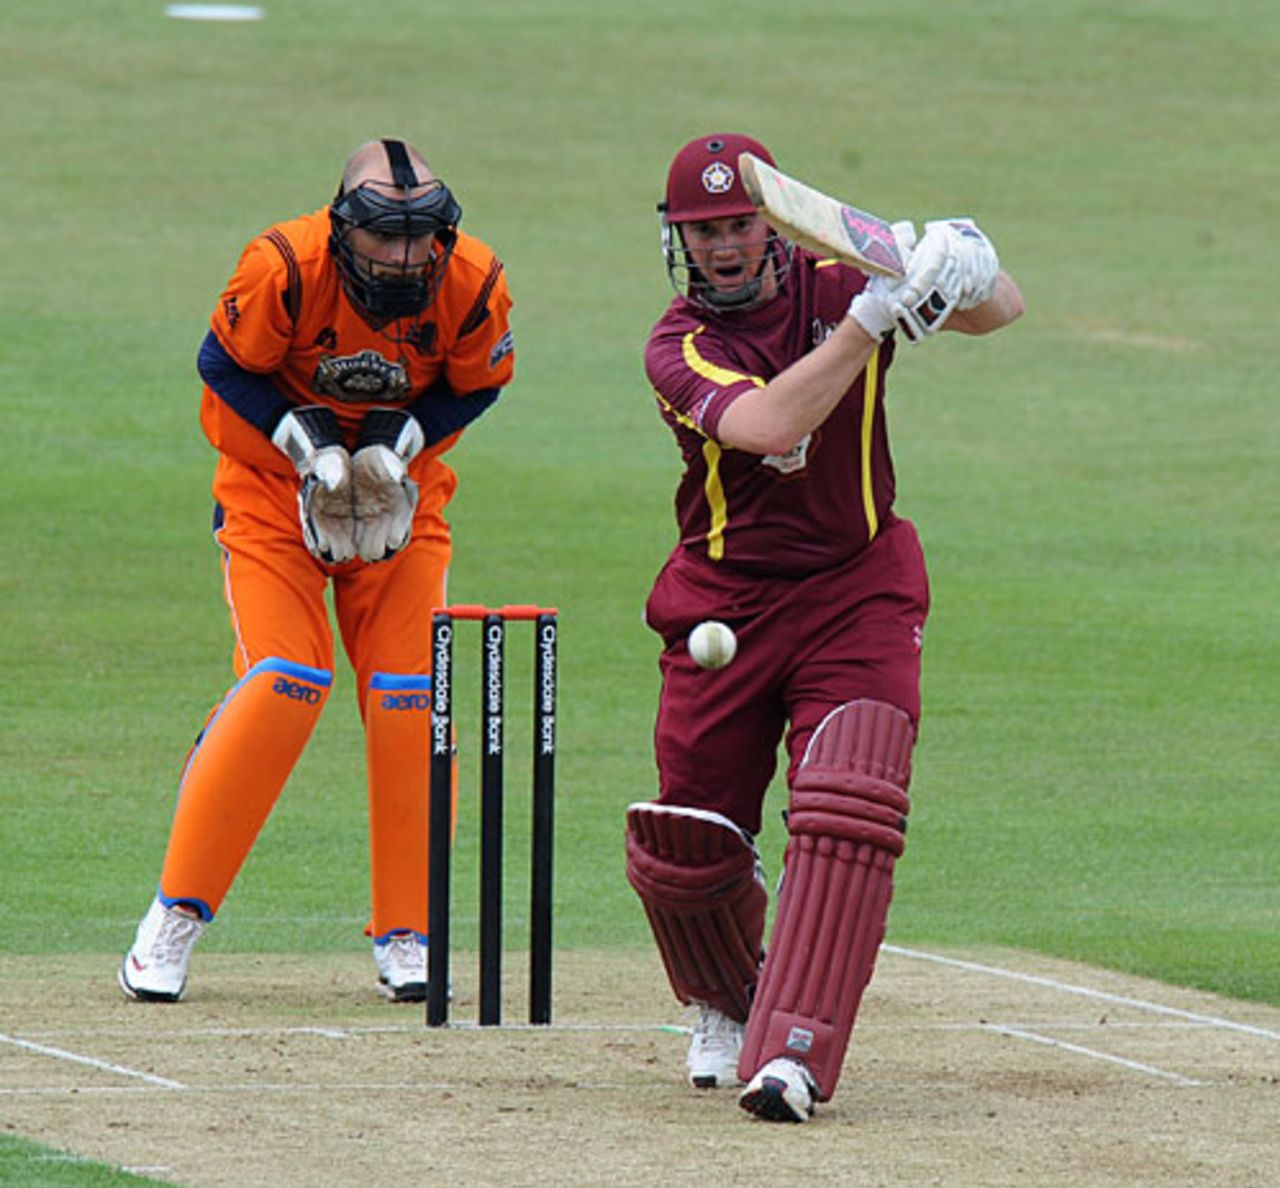 David Sales made 62 from 58 balls at the top of the order for Northamptonshire, Northamptonshire v Netherlands, Clydesdale Bank 40, Northampton, May 31, 2010